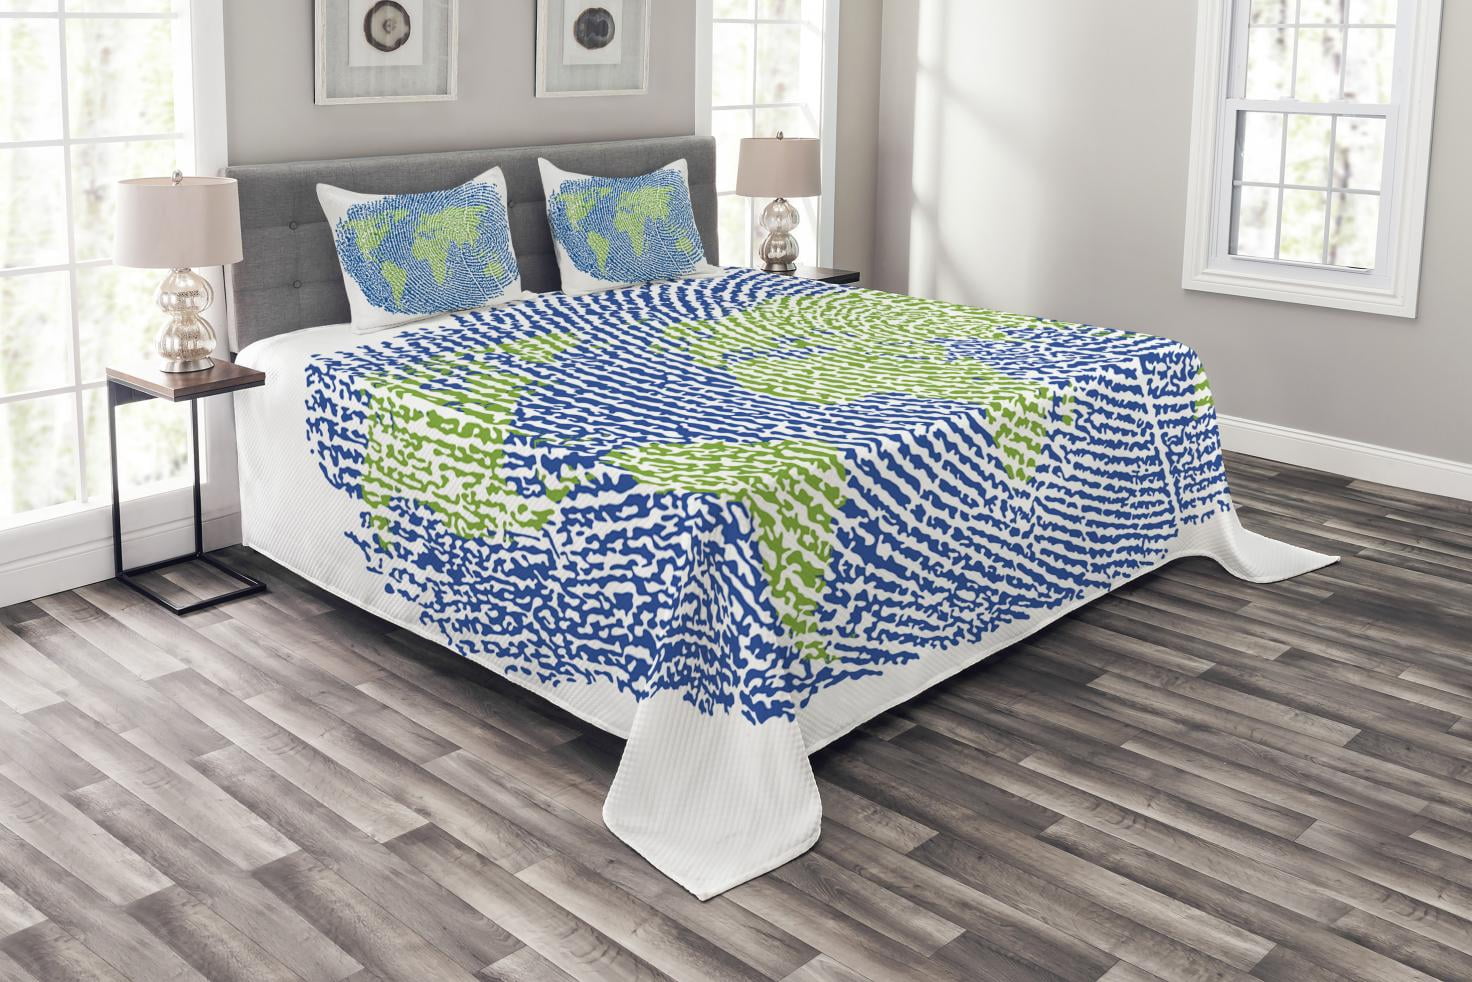 Gray Quilted Bedspread & Pillow Shams Set World Map Continent Earth Print 